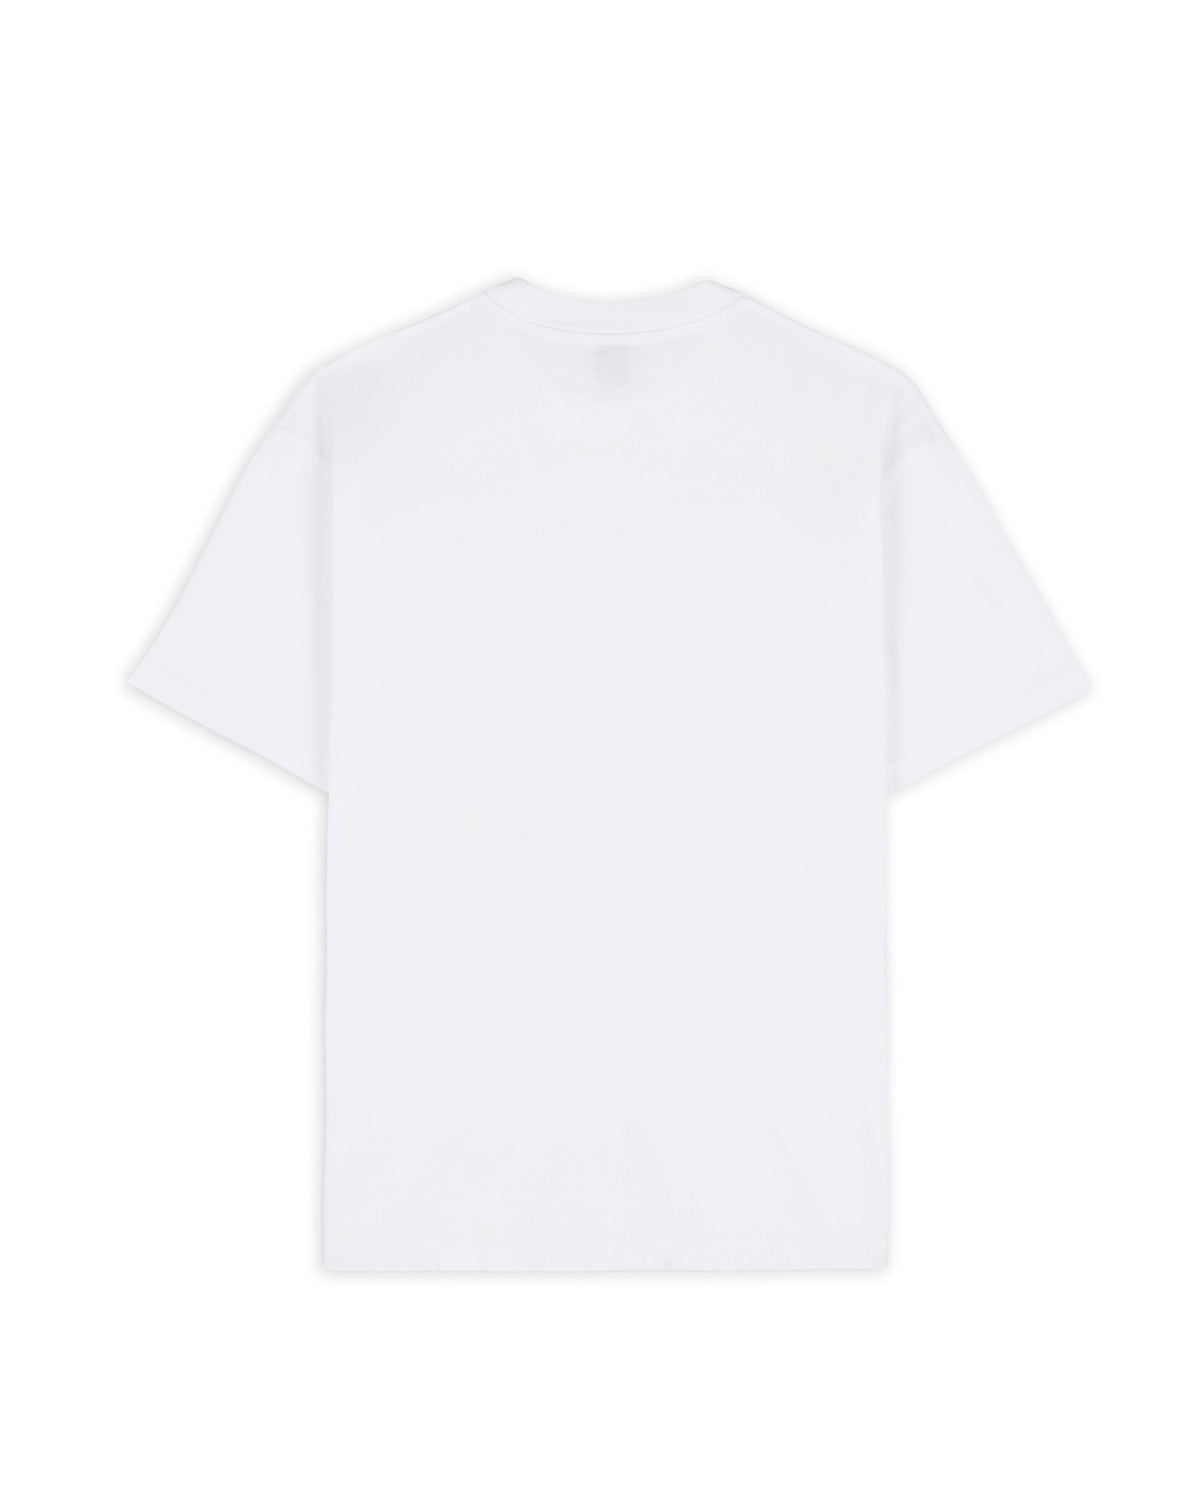 End of Days T-Shirt - White 2